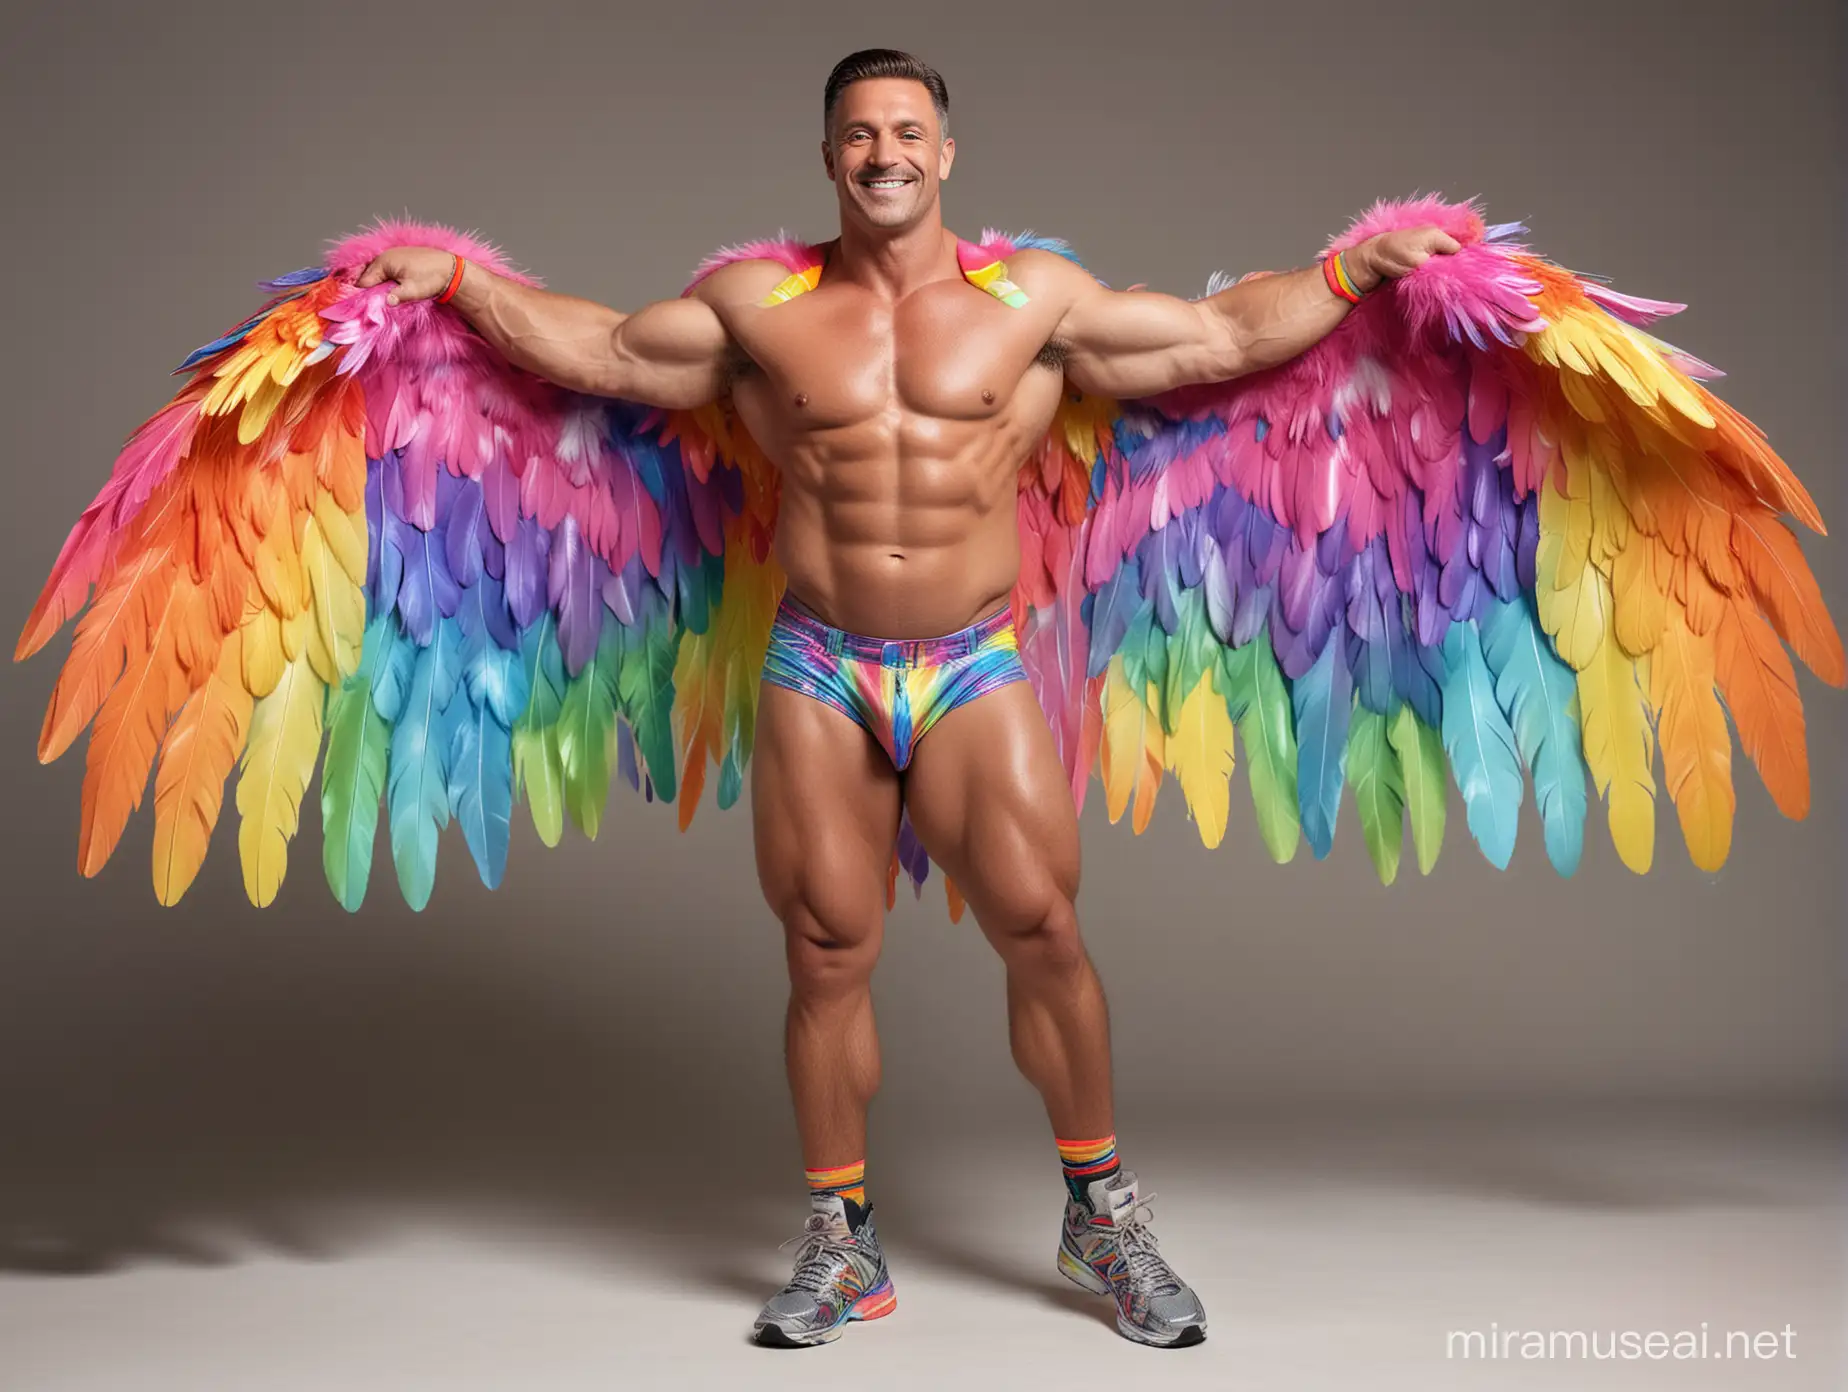 Full Body to feet Topless 40s Ultra Chunky Bodybuilder Daddy with Great Smile wearing Multi-Highlighter Bright Rainbow with white Coloured See Through Huge Eagle Wings Shoulder Jacket Short shorts left arm up Flexing